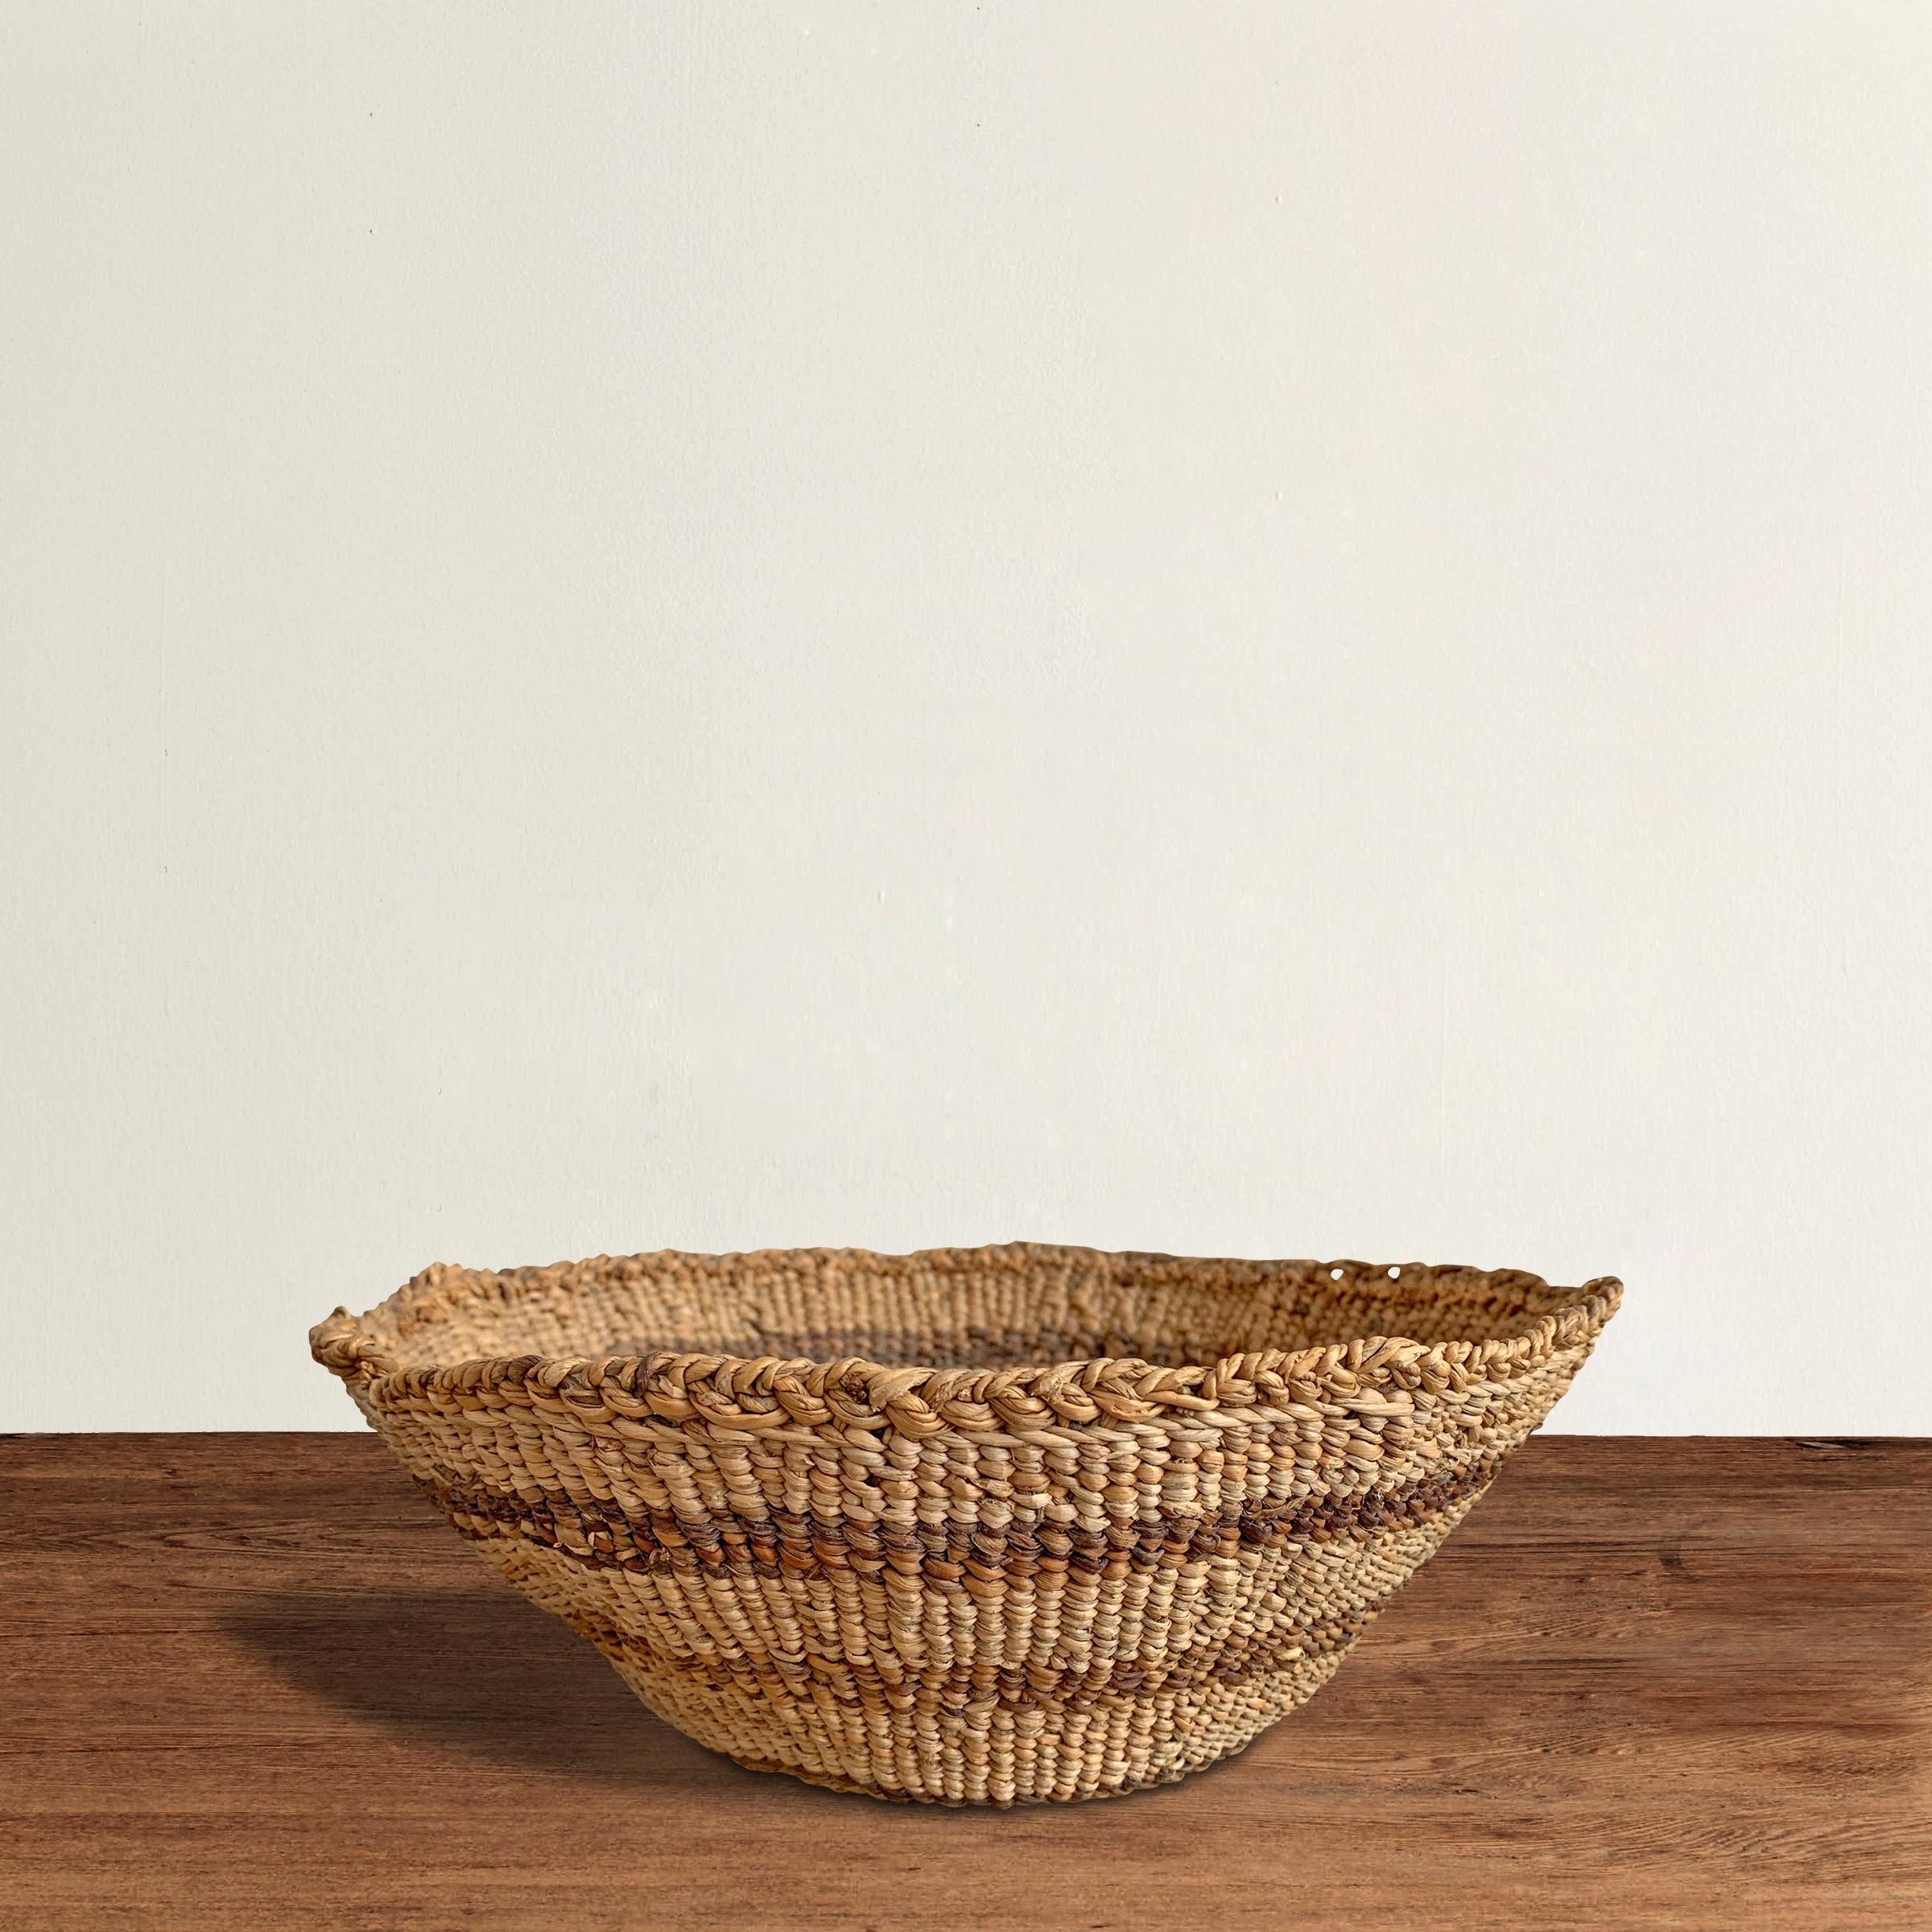 A wonderful and charming early 20th century Pacific NW Native American handwoven basket with a decorative linear pattern using varying shades of natural grasses.